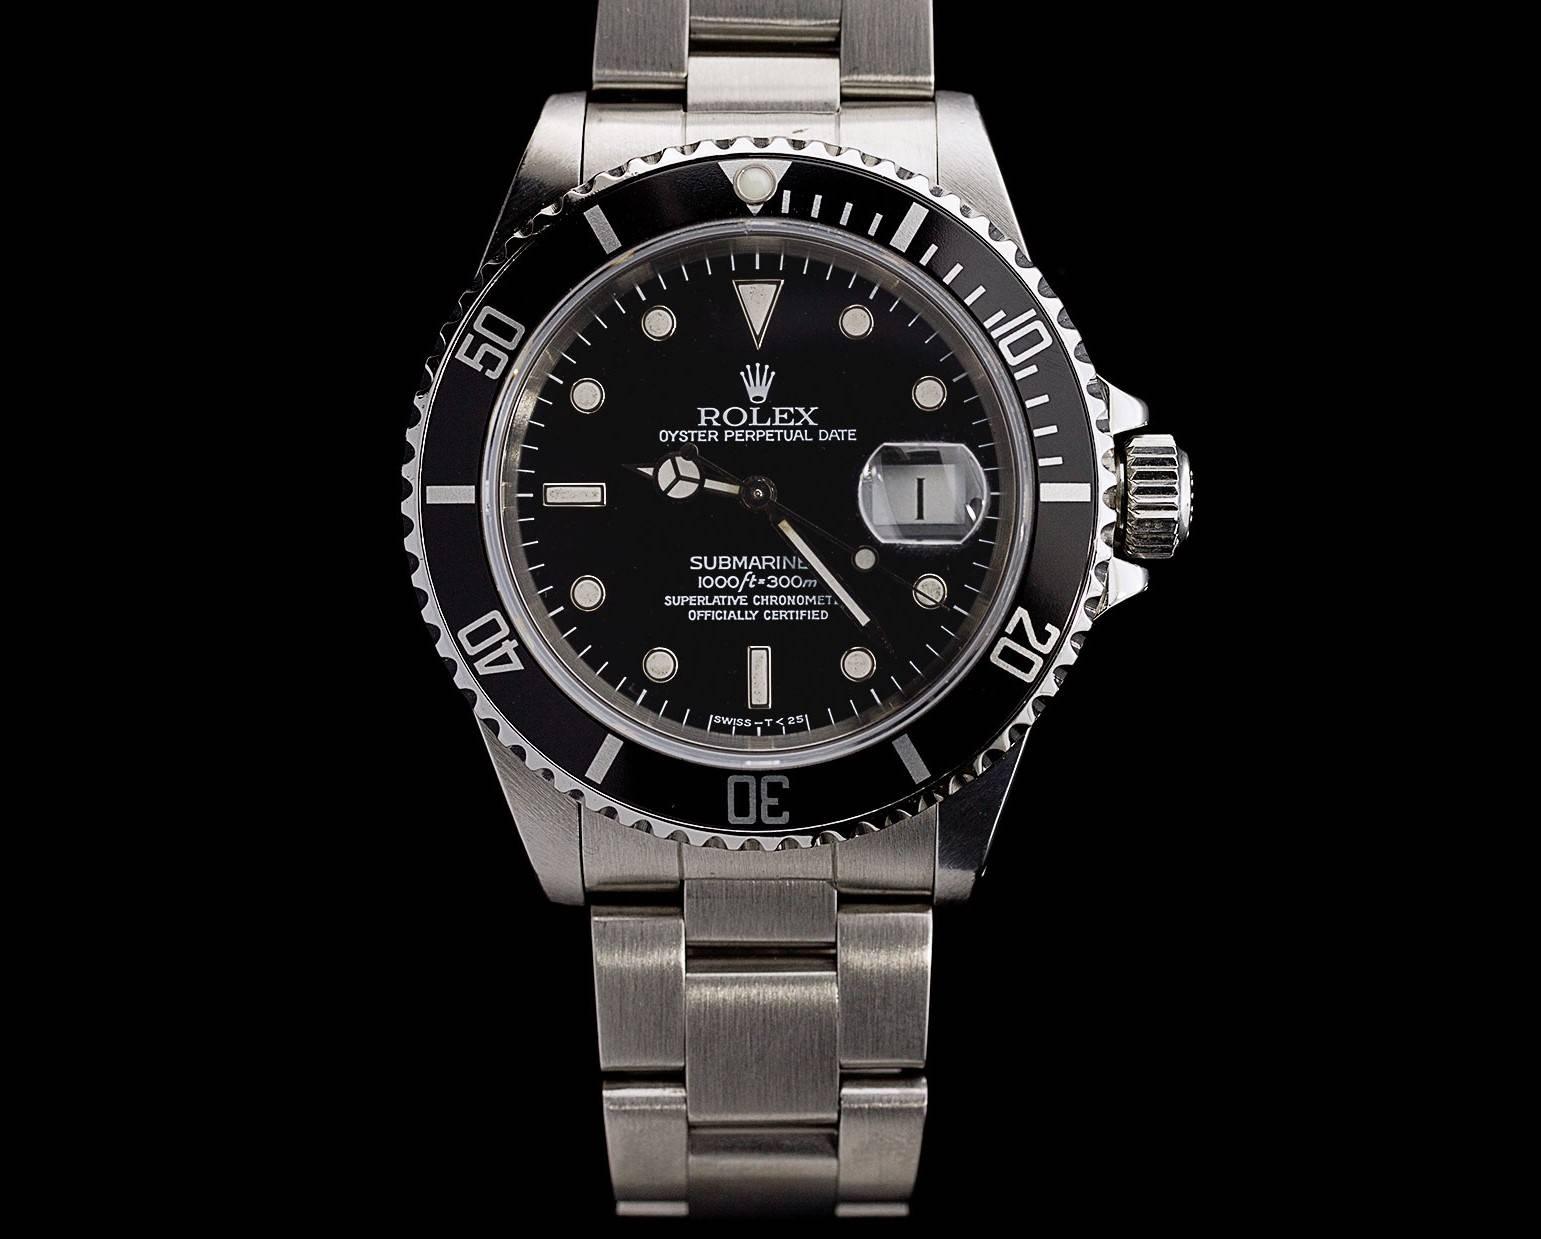 Since the Rolex Submariner was first introduced in 1953, watch enthusiasts worldwide have loved its design. Its versatile style & iconic design can accompany you anywhere from the office to the bottom of the ocean. Featuring a 40mm stainless